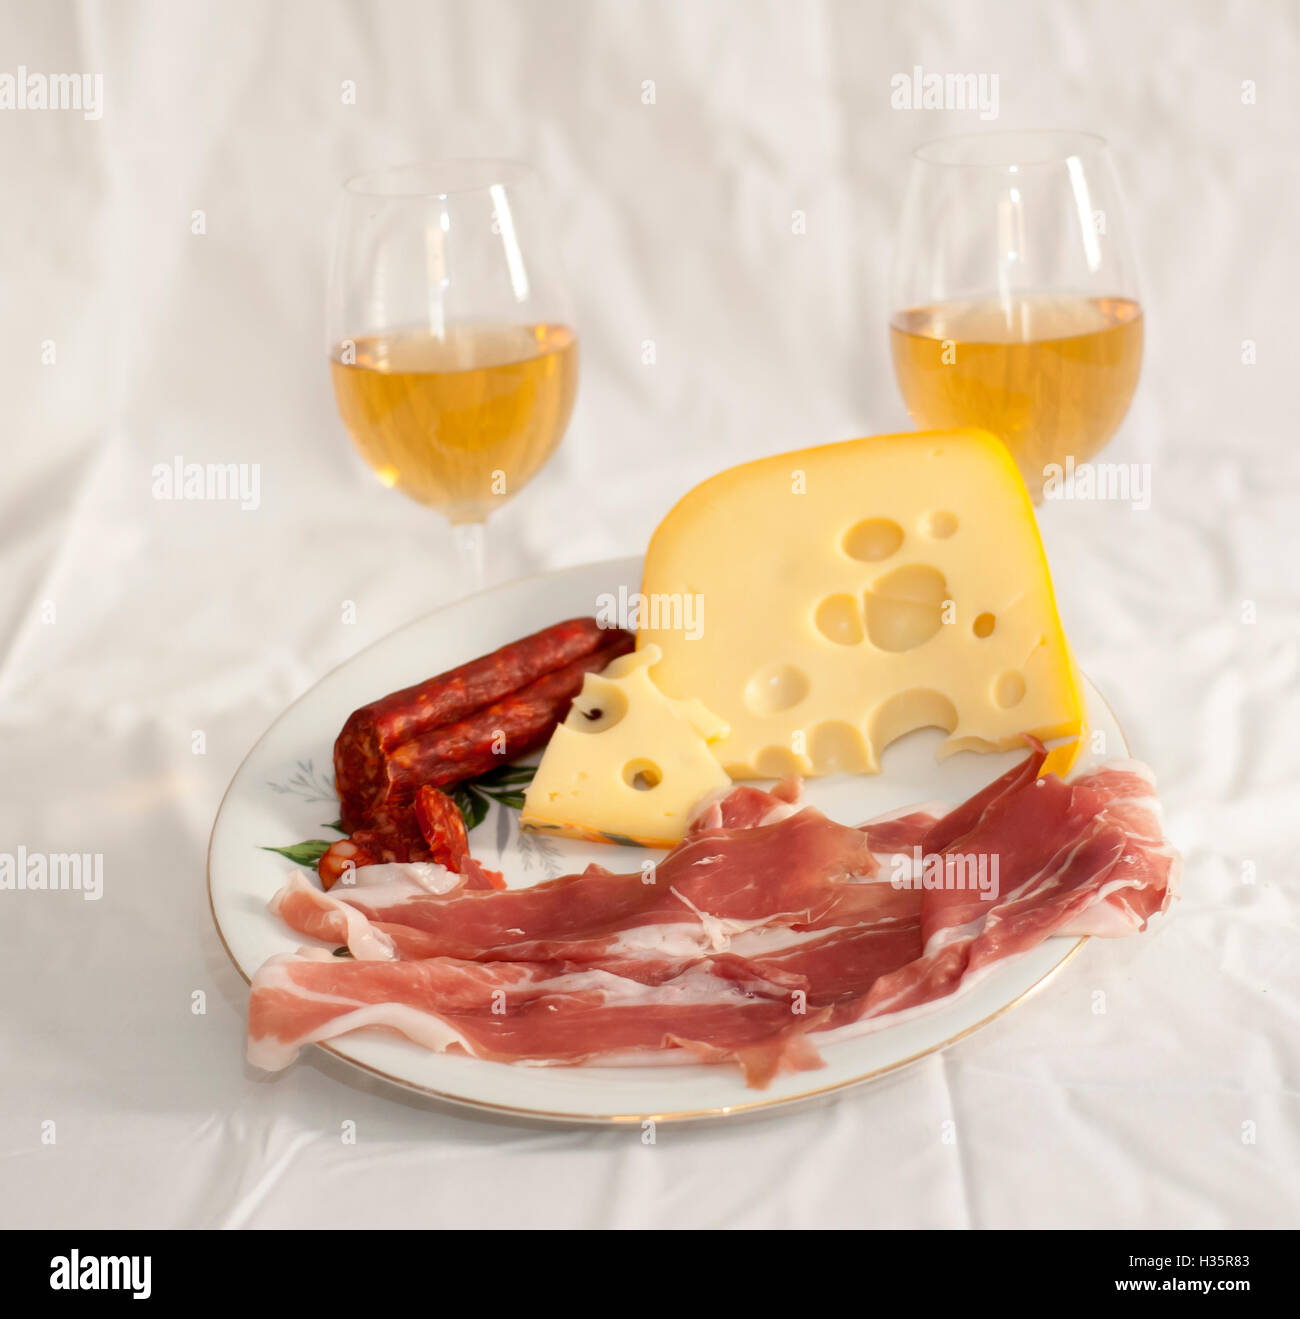 Appetizers with white wine Stock Photo